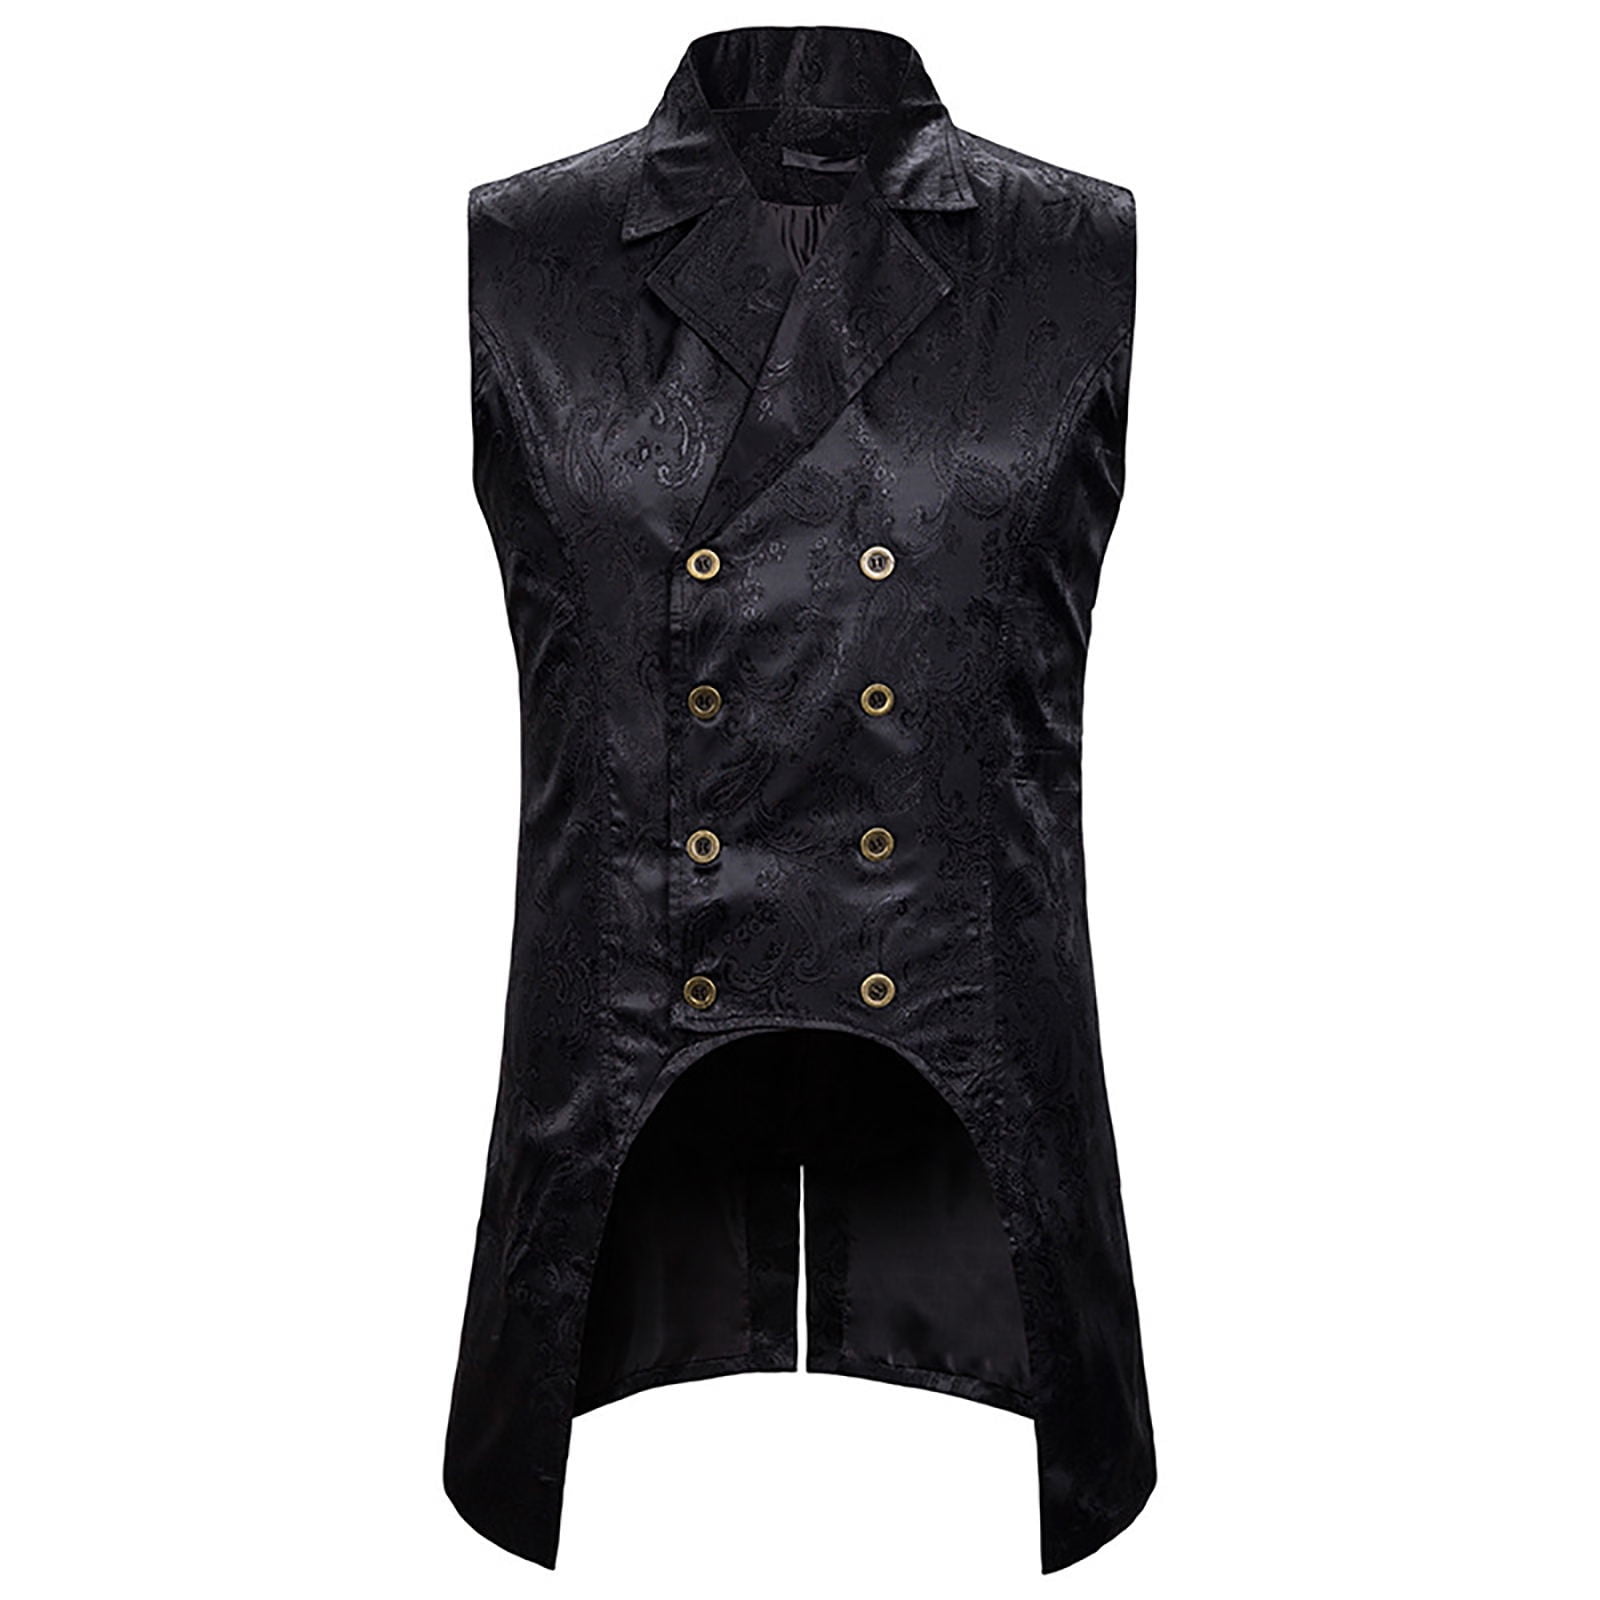 Lilgiuy Mens Retro Vest Double Breasted Slim Fit Gothic Steampunk ...